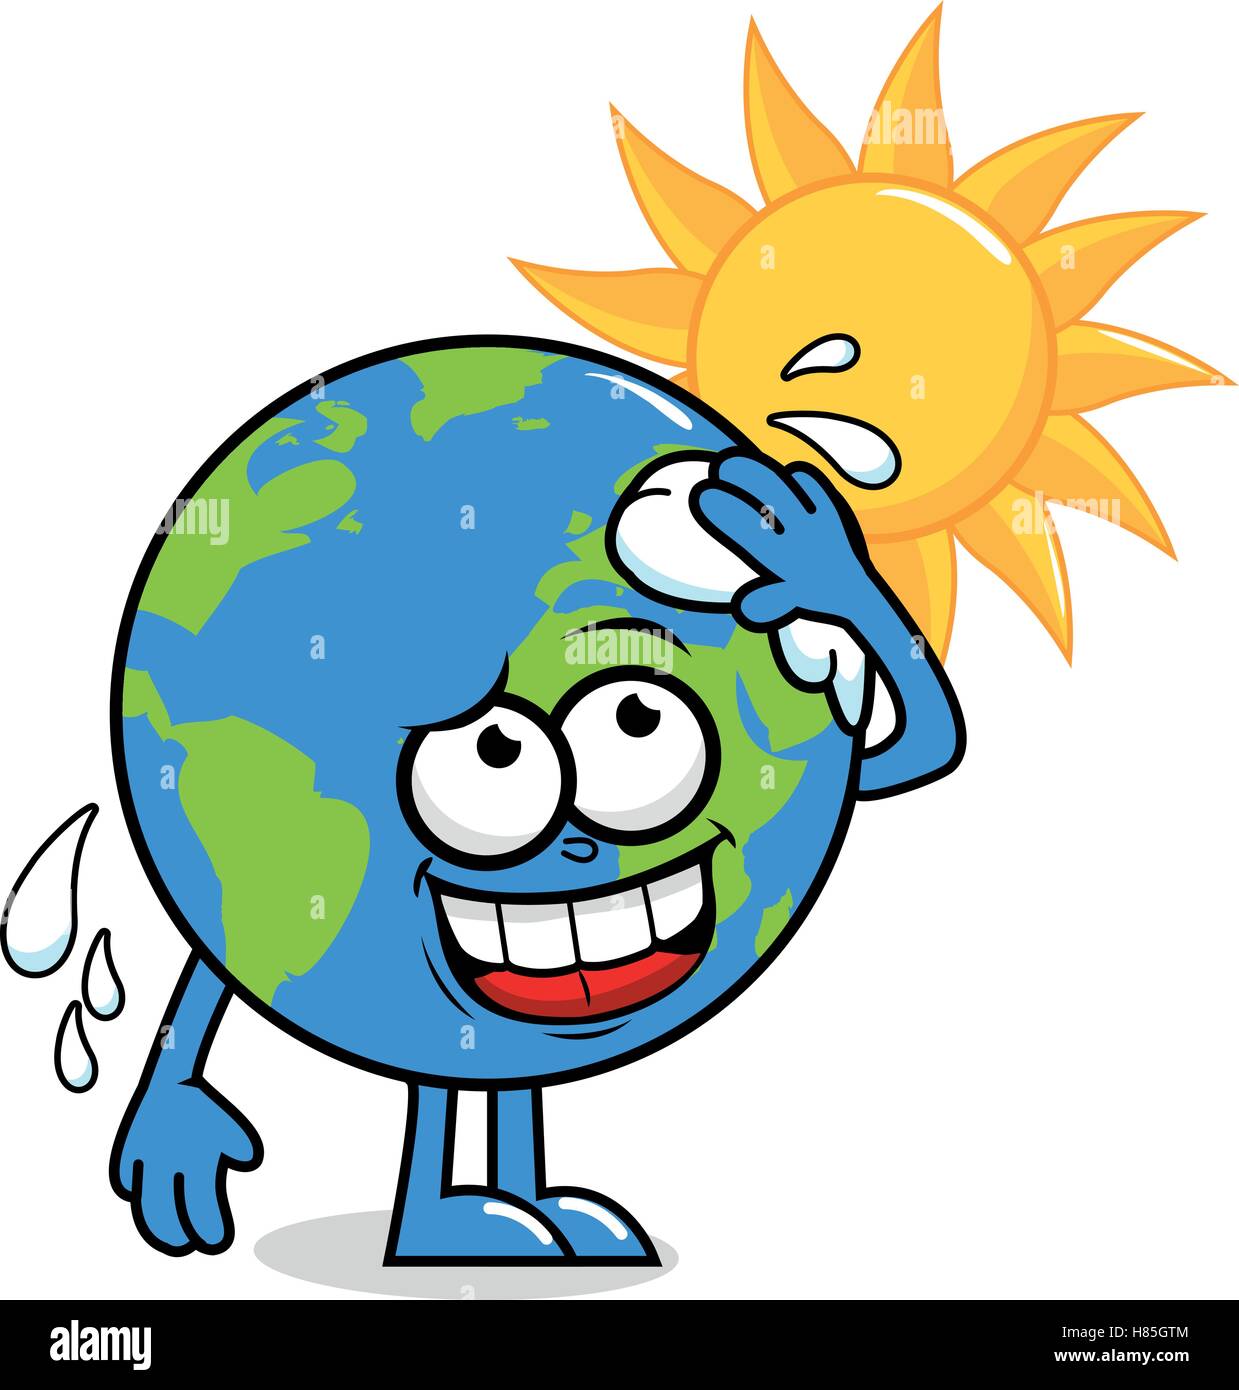 Cartoon planet earth character in front of a burning sun wiping sweat and getting hot. Stock Vector